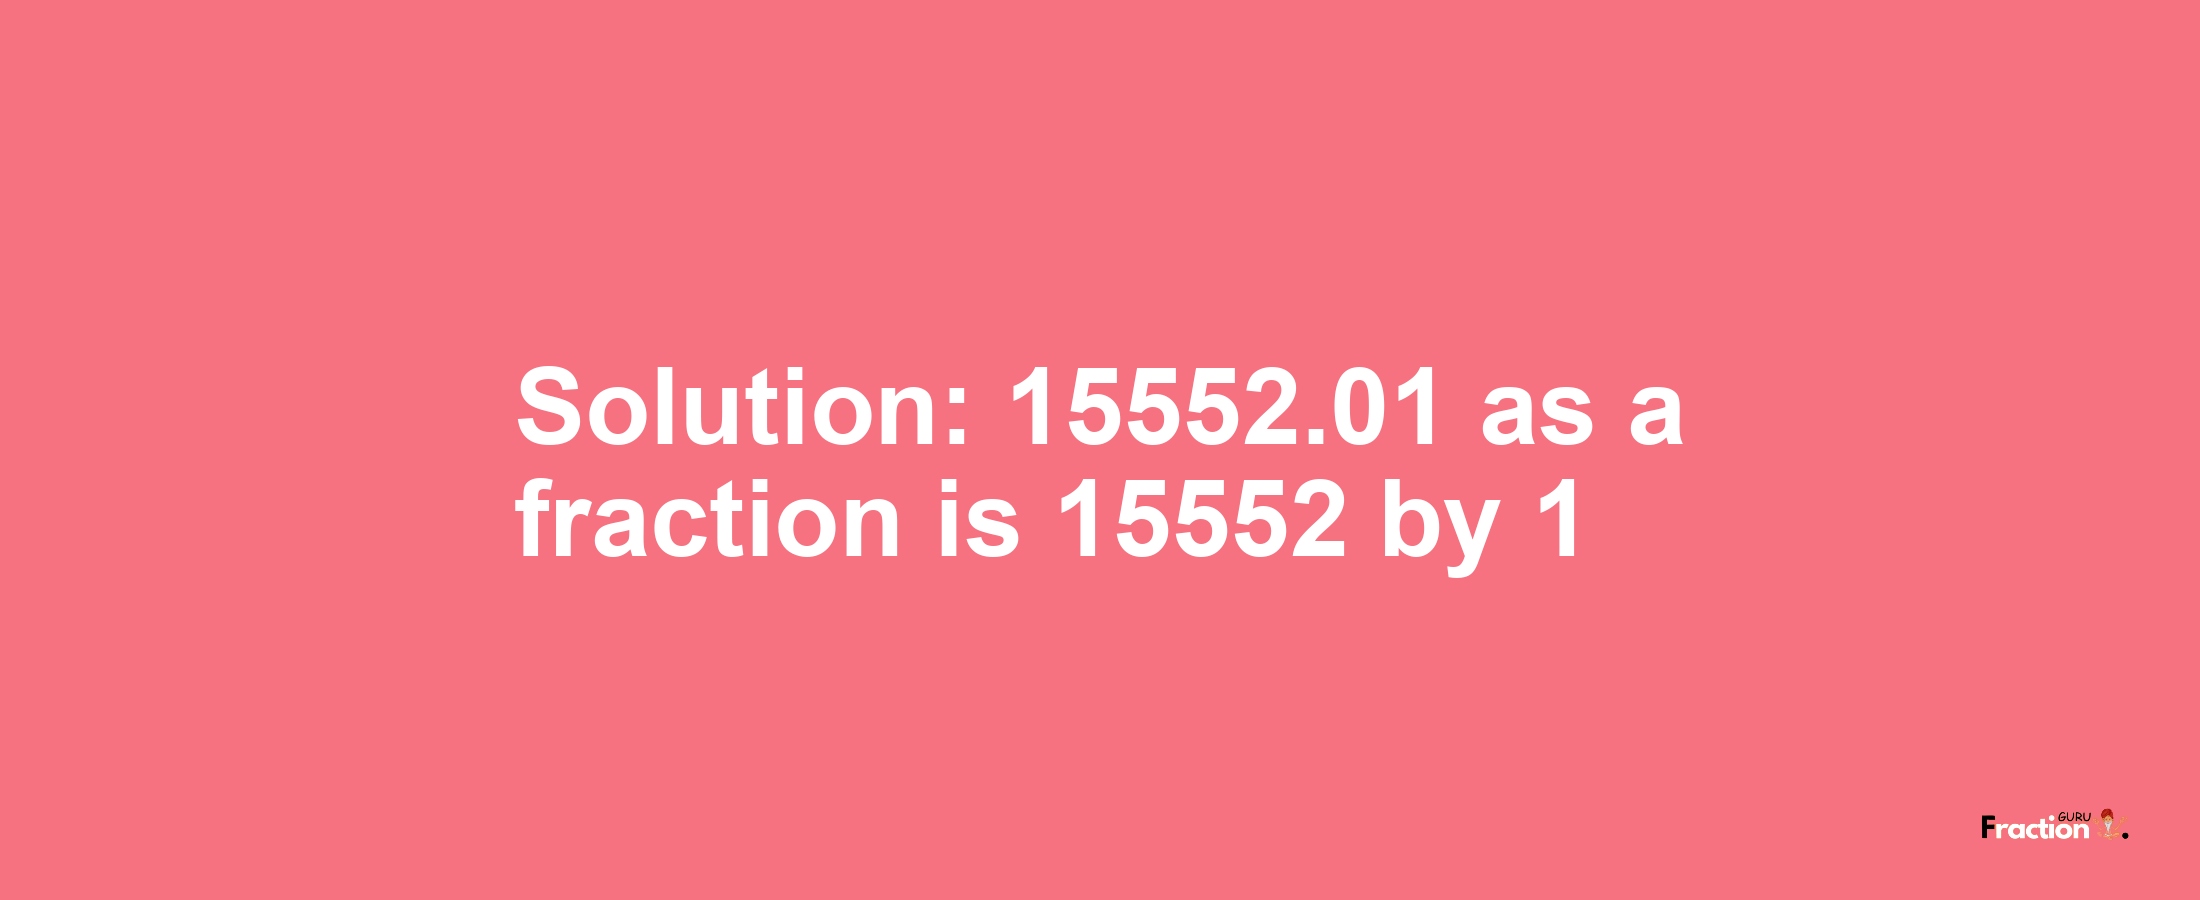 Solution:15552.01 as a fraction is 15552/1